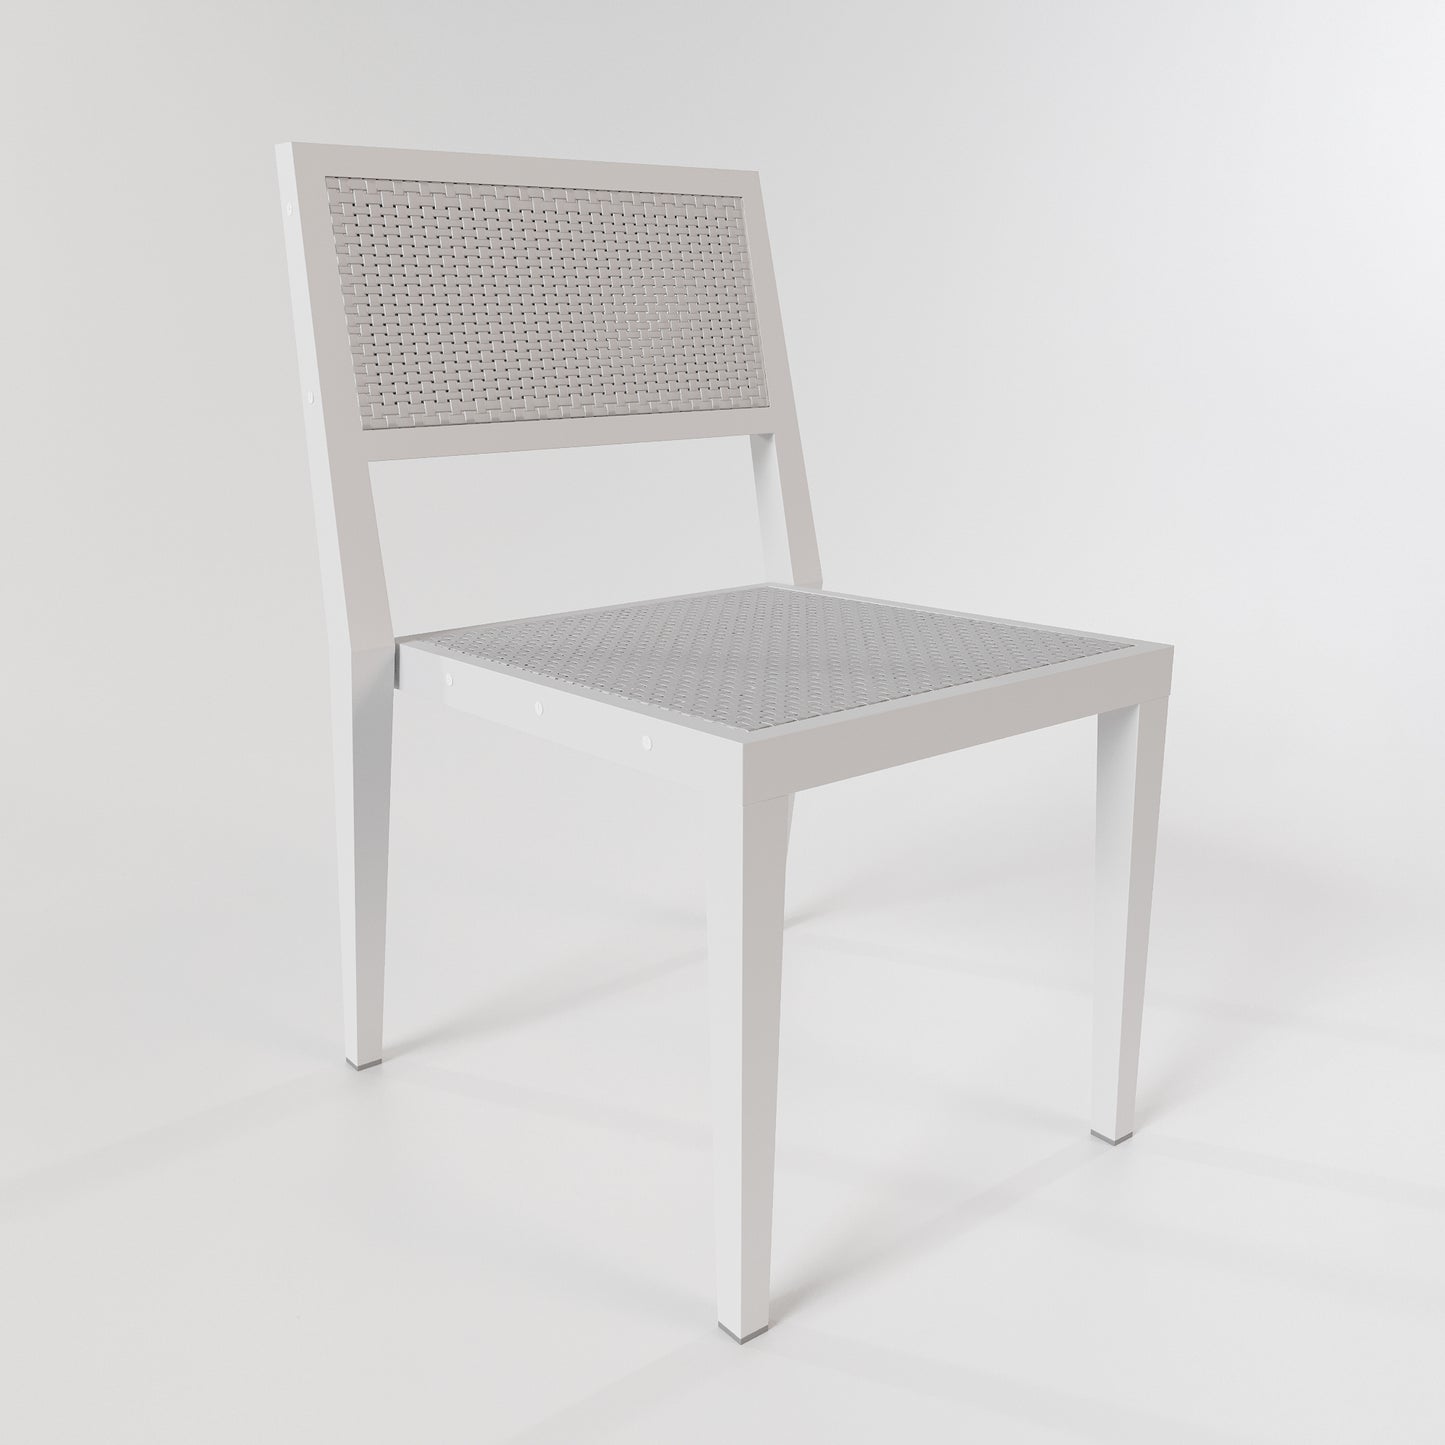 Biscayne Dining Chair [AL, Wicker]